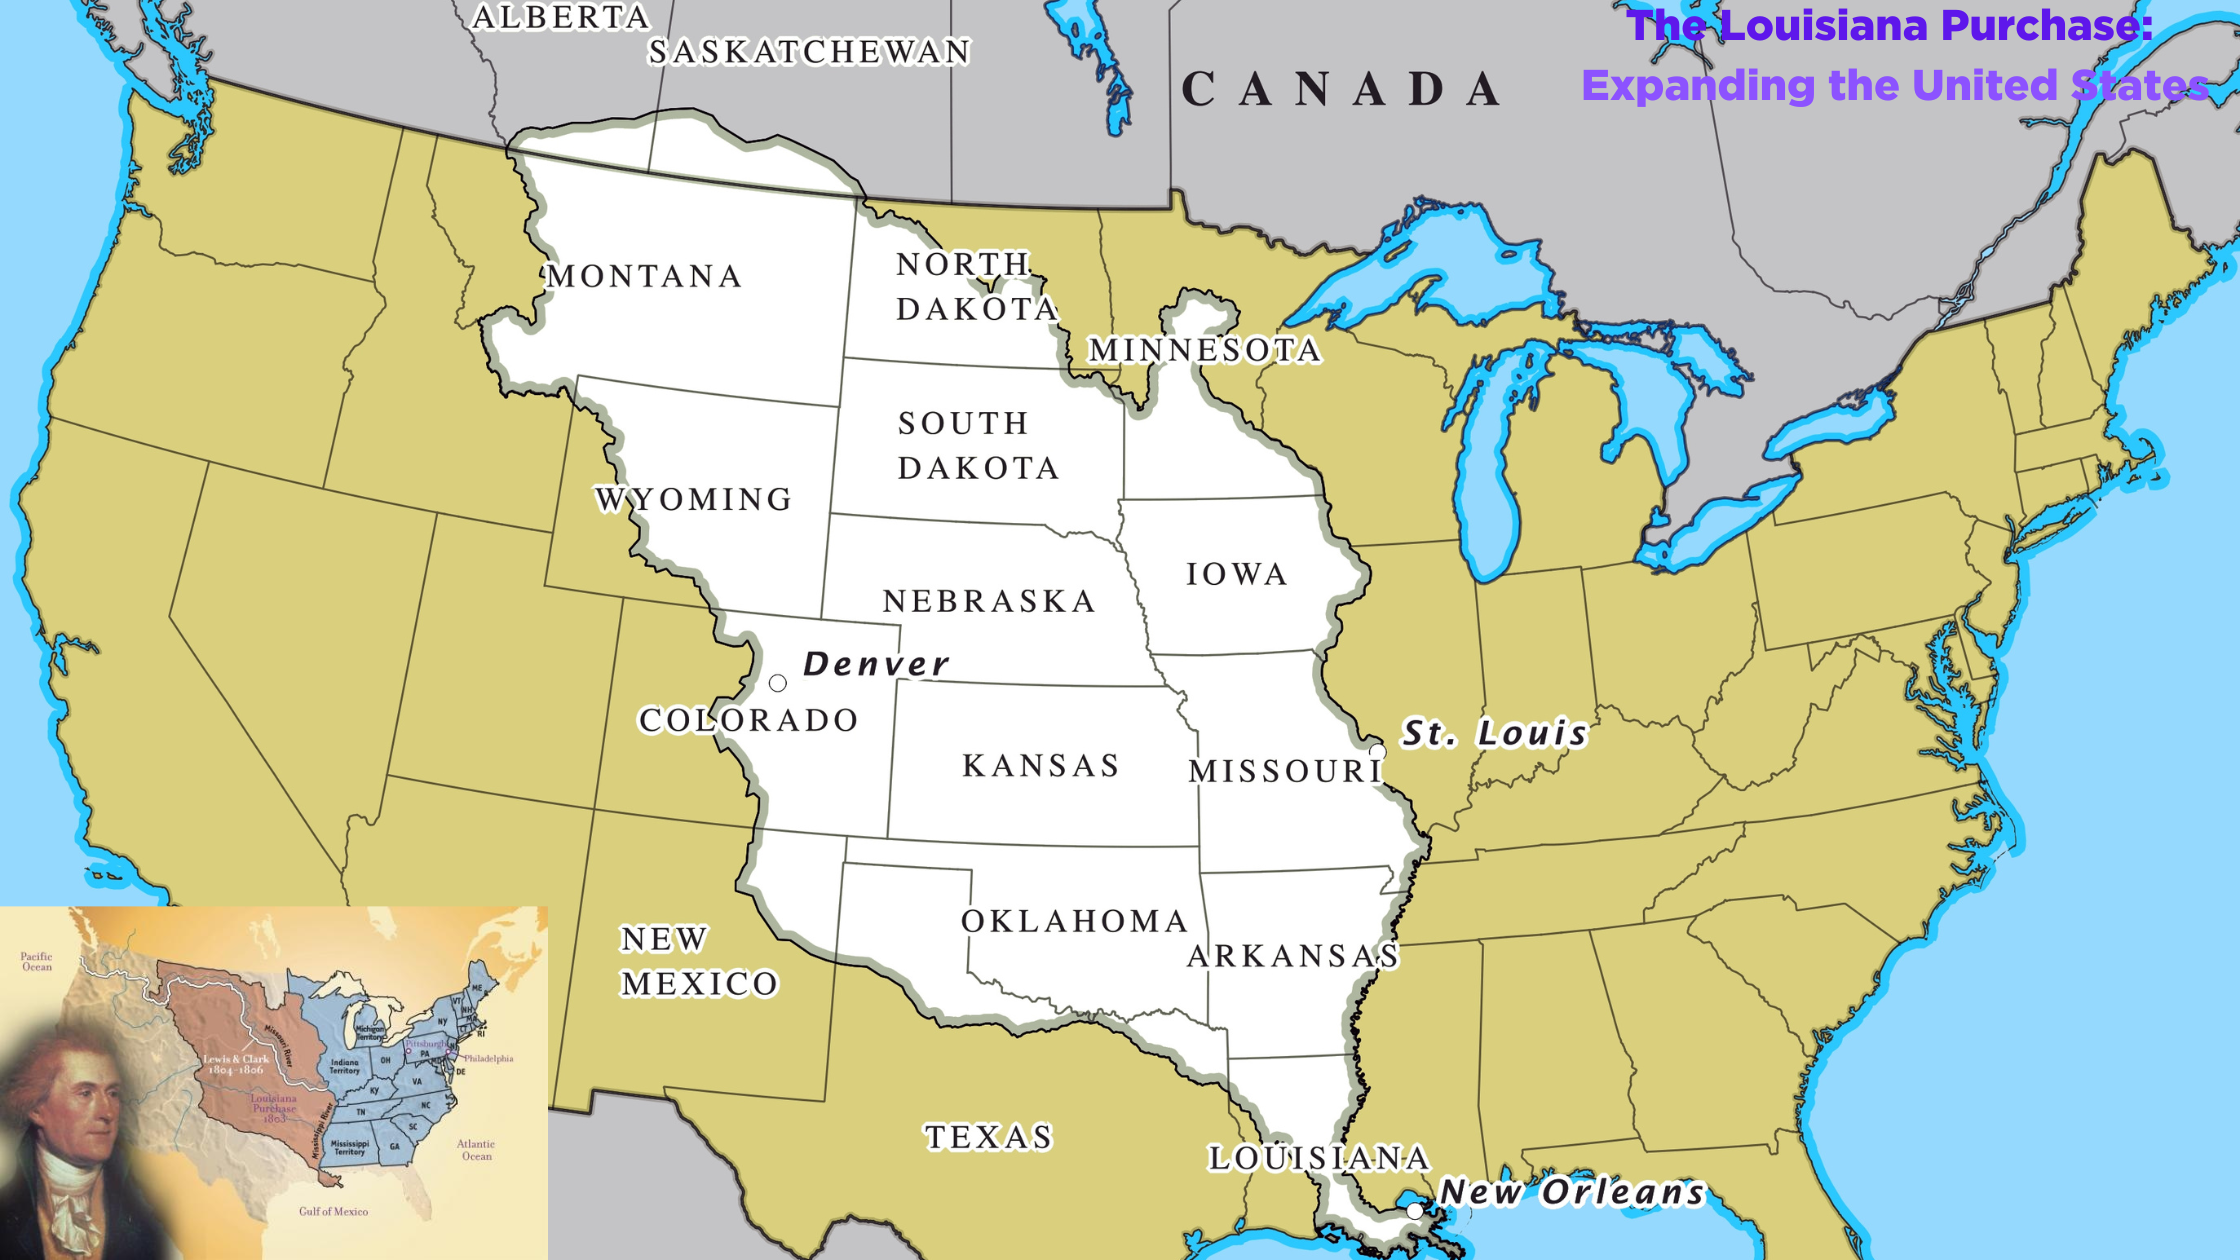 The Louisiana Purchase Expanding the United States